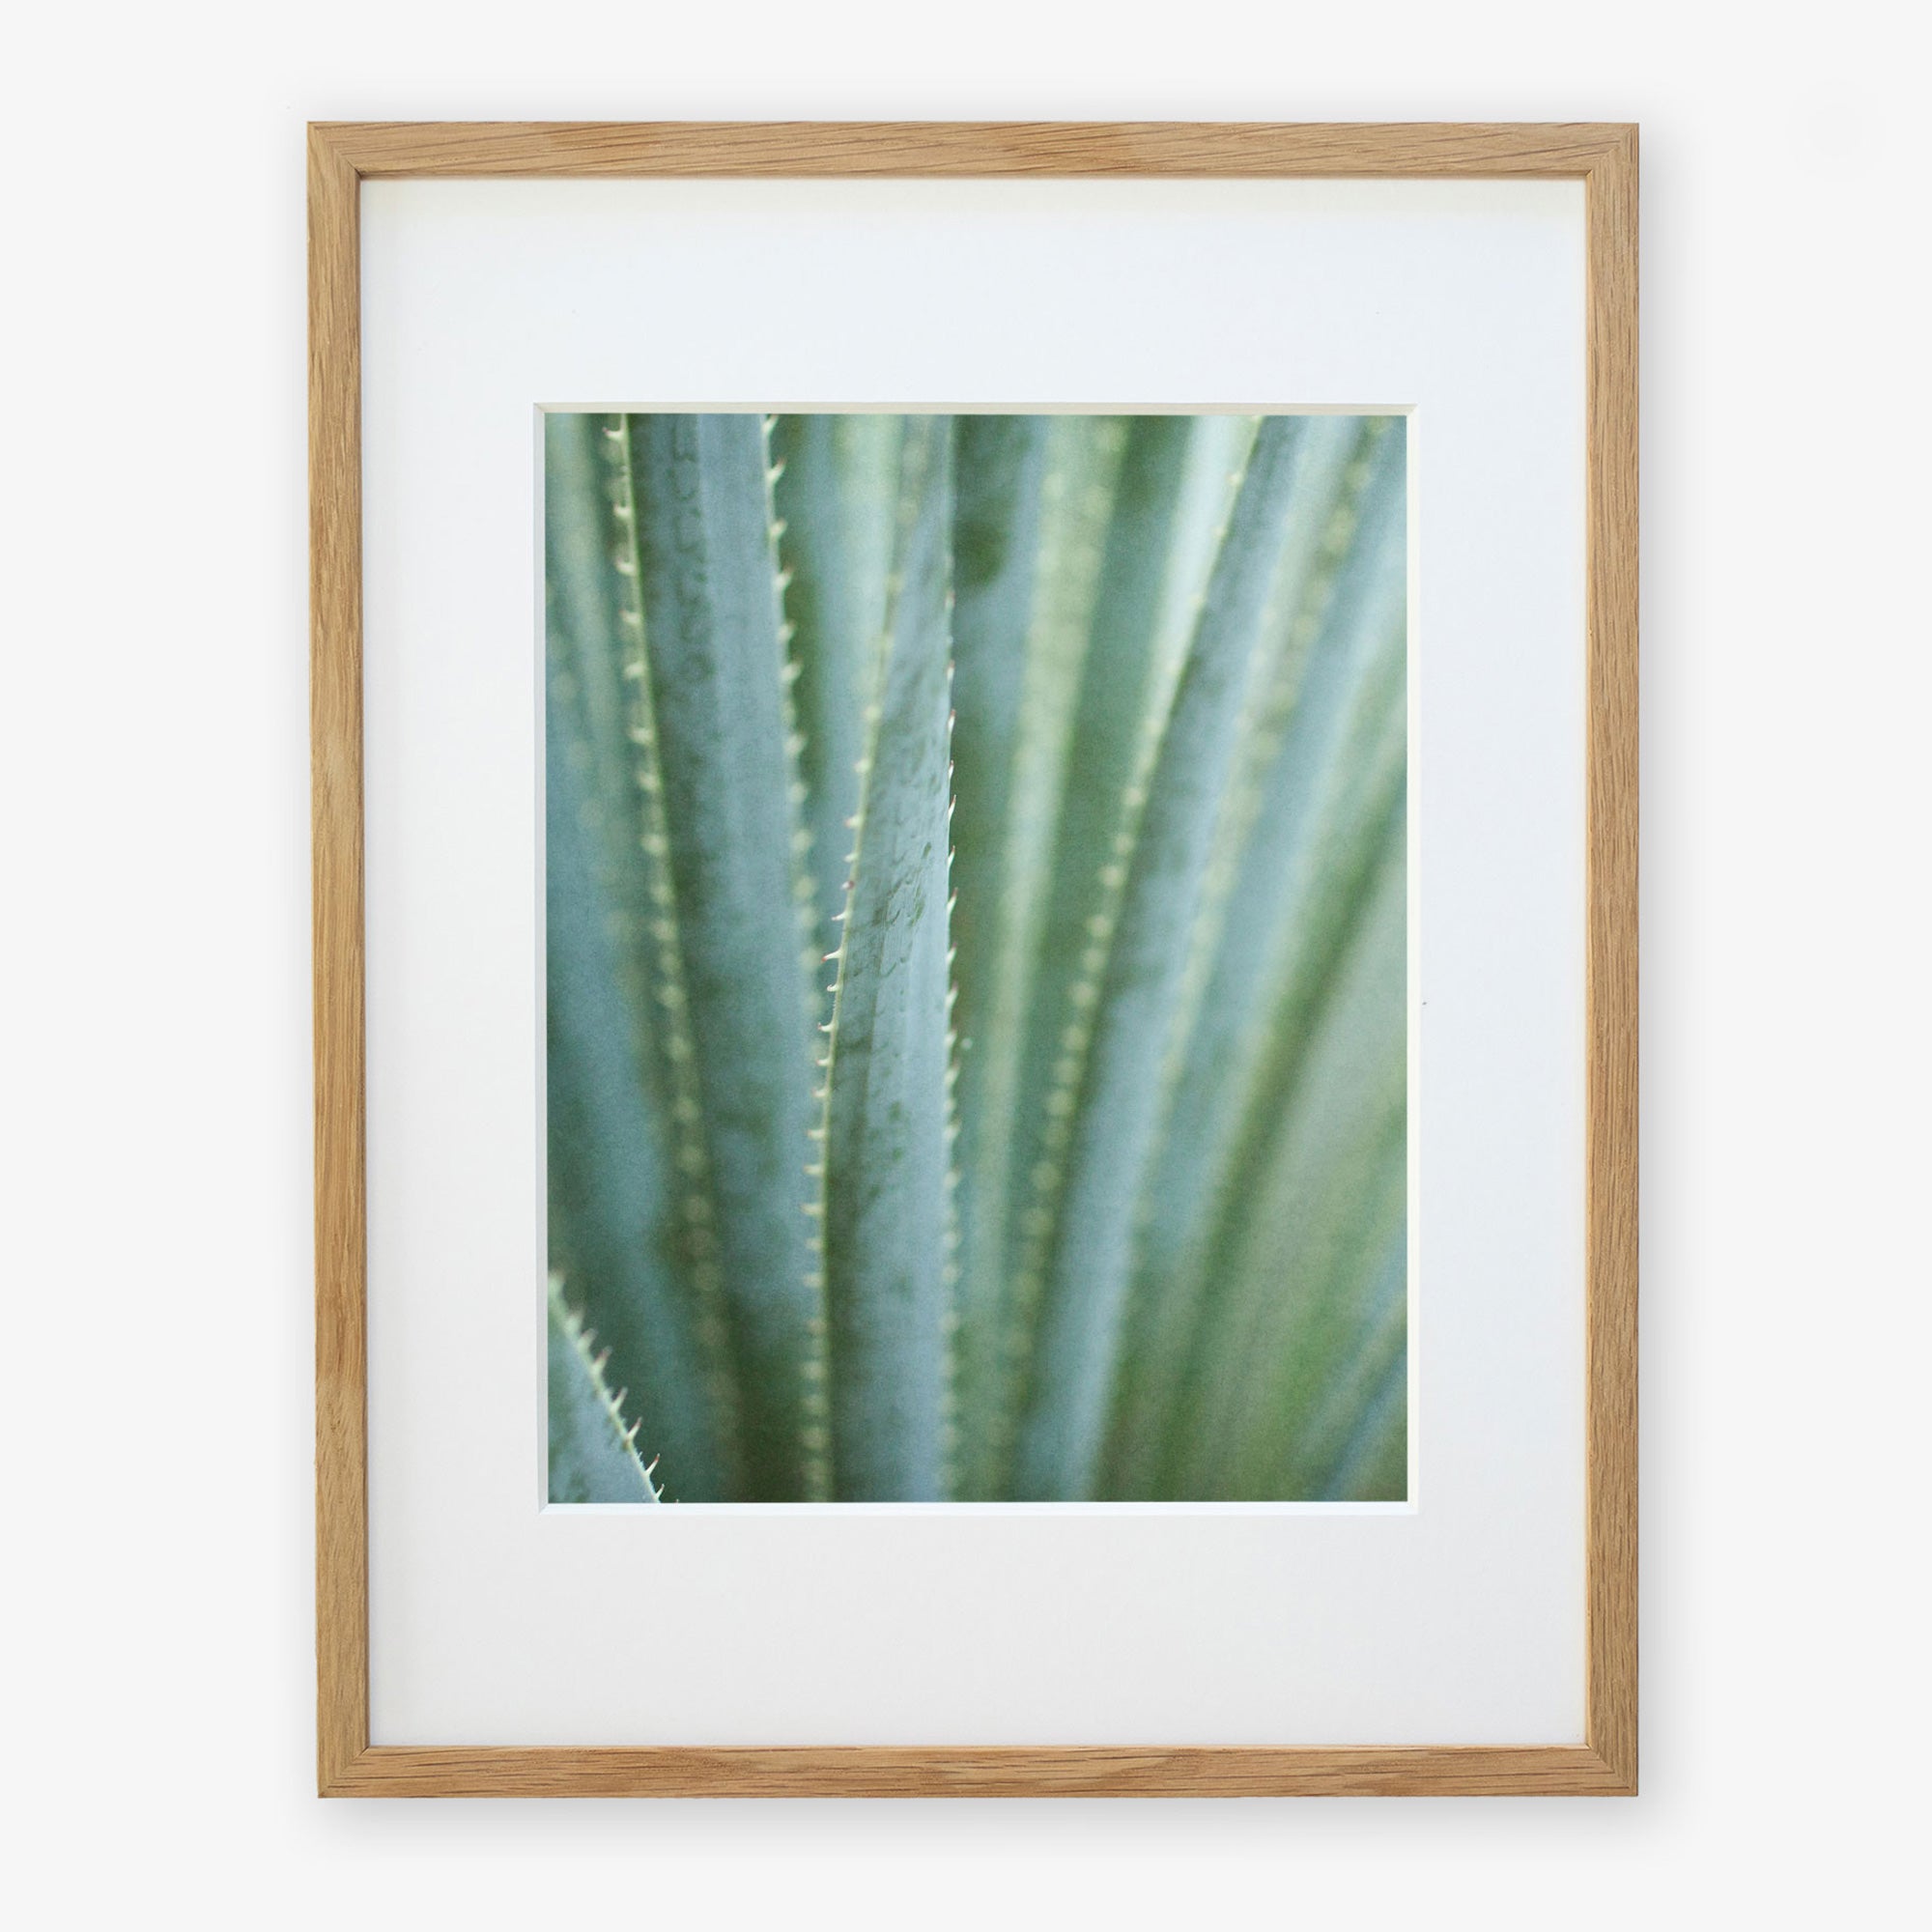 A framed photograph of the Green Botanical Print, 'Strands and Spikes II' by Offley Green, focusing on the elongated green leaves with spiky edges, displayed in a light wooden frame against a white background and printed on archival photographic paper.